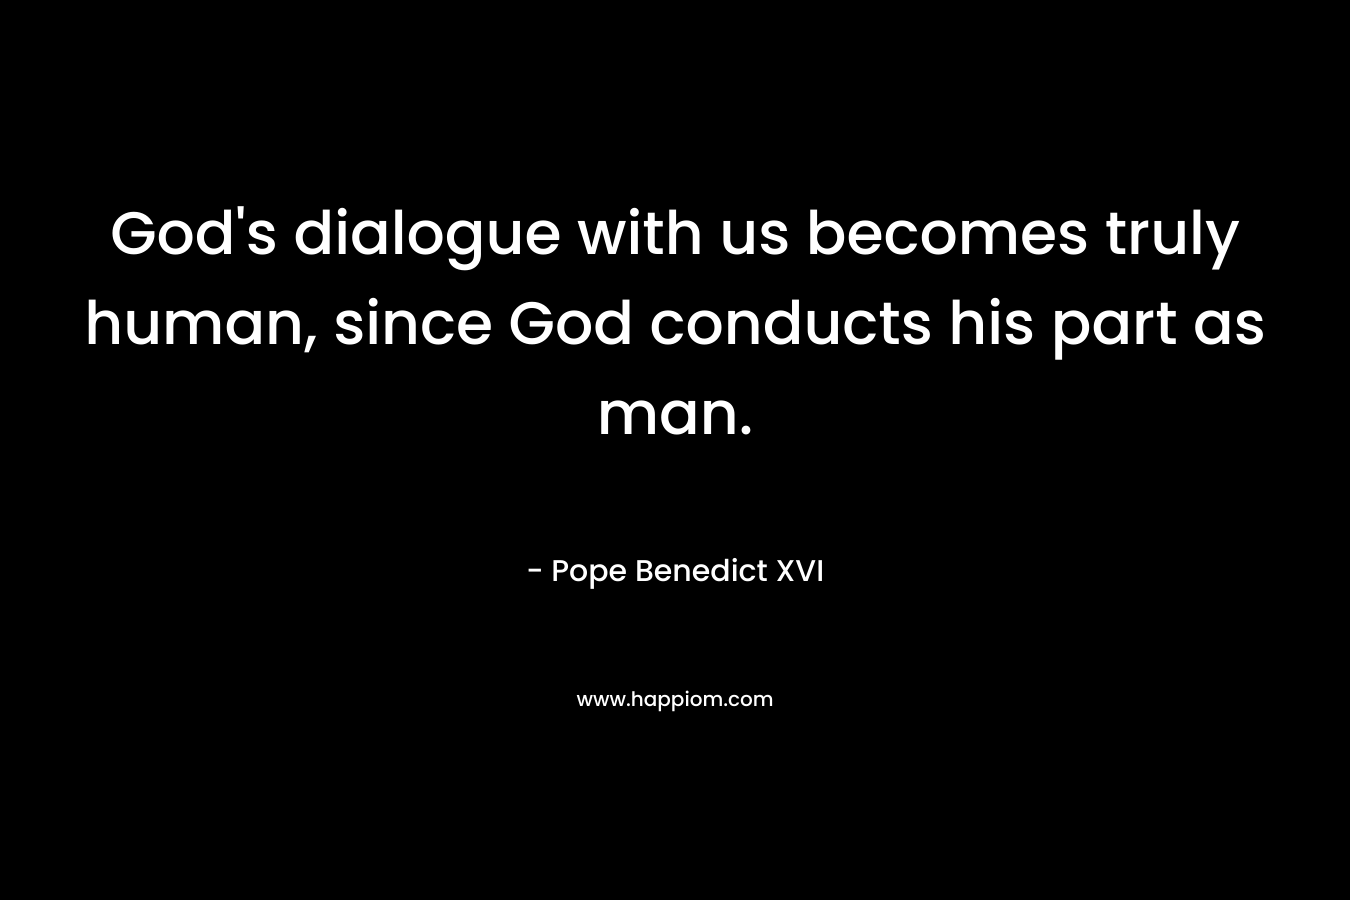 God's dialogue with us becomes truly human, since God conducts his part as man.